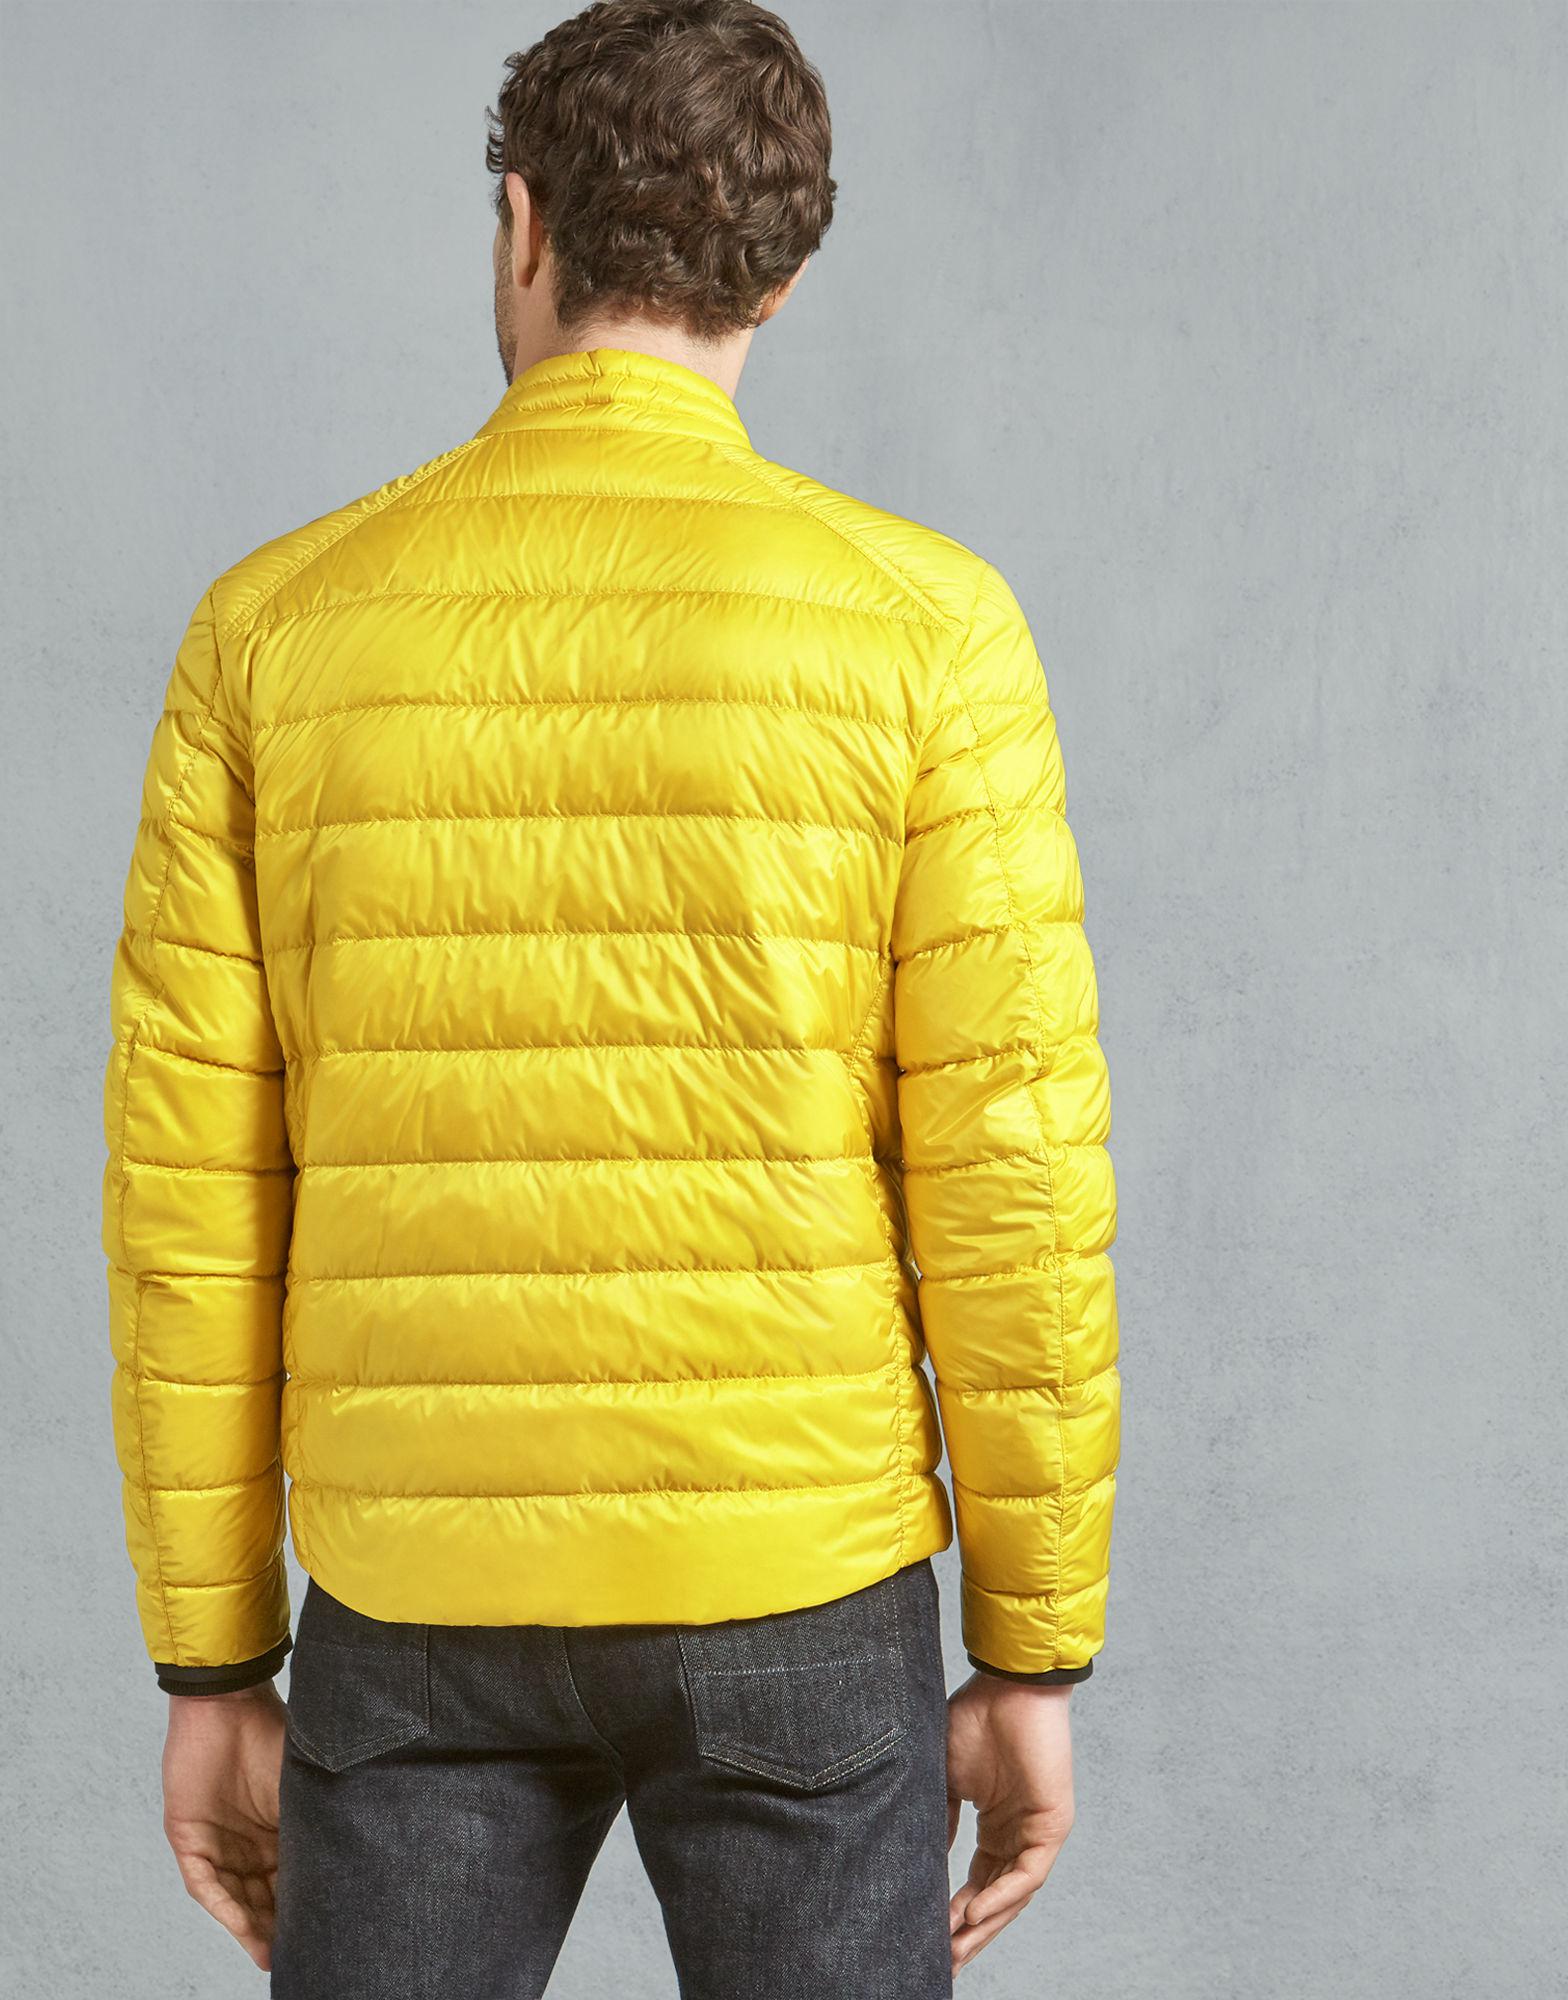 Belstaff Synthetic Ryegate Down Jacket in Racing Yellow (Yellow) for Men -  Lyst